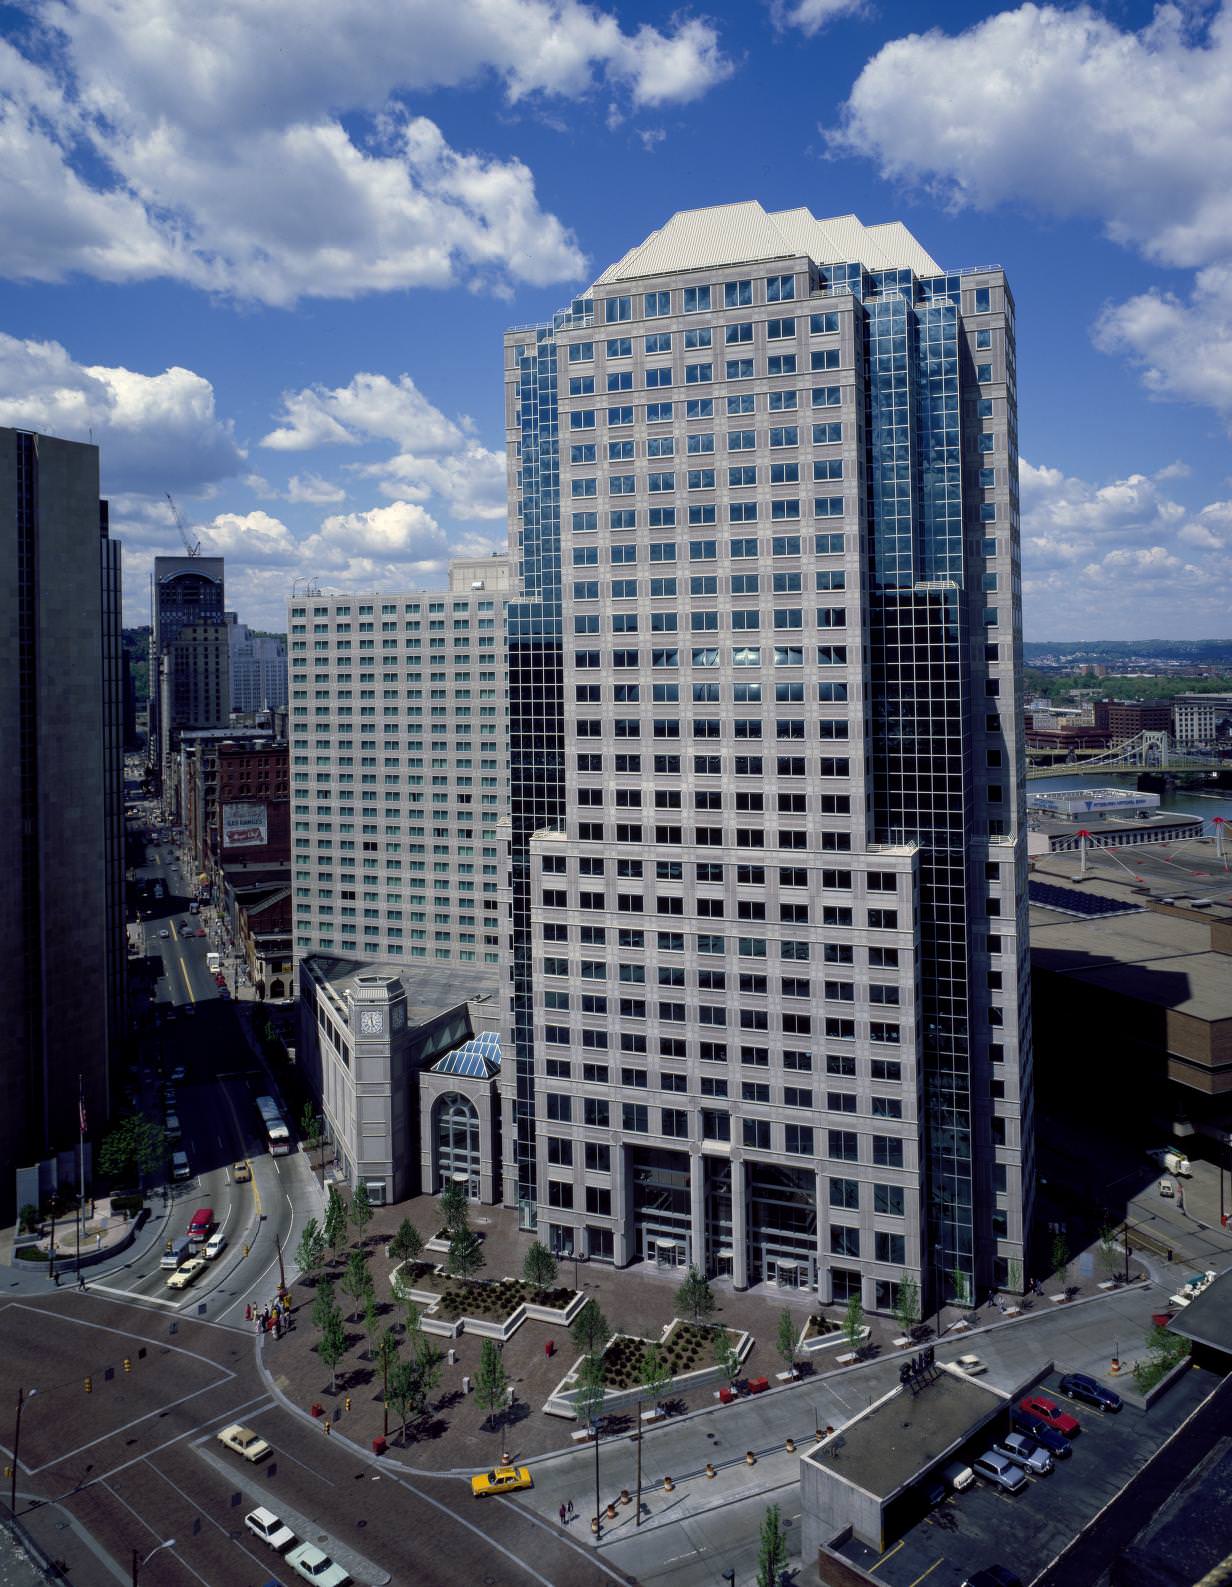 Office structures in Pittsburgh, Pennsylvania, 1980.